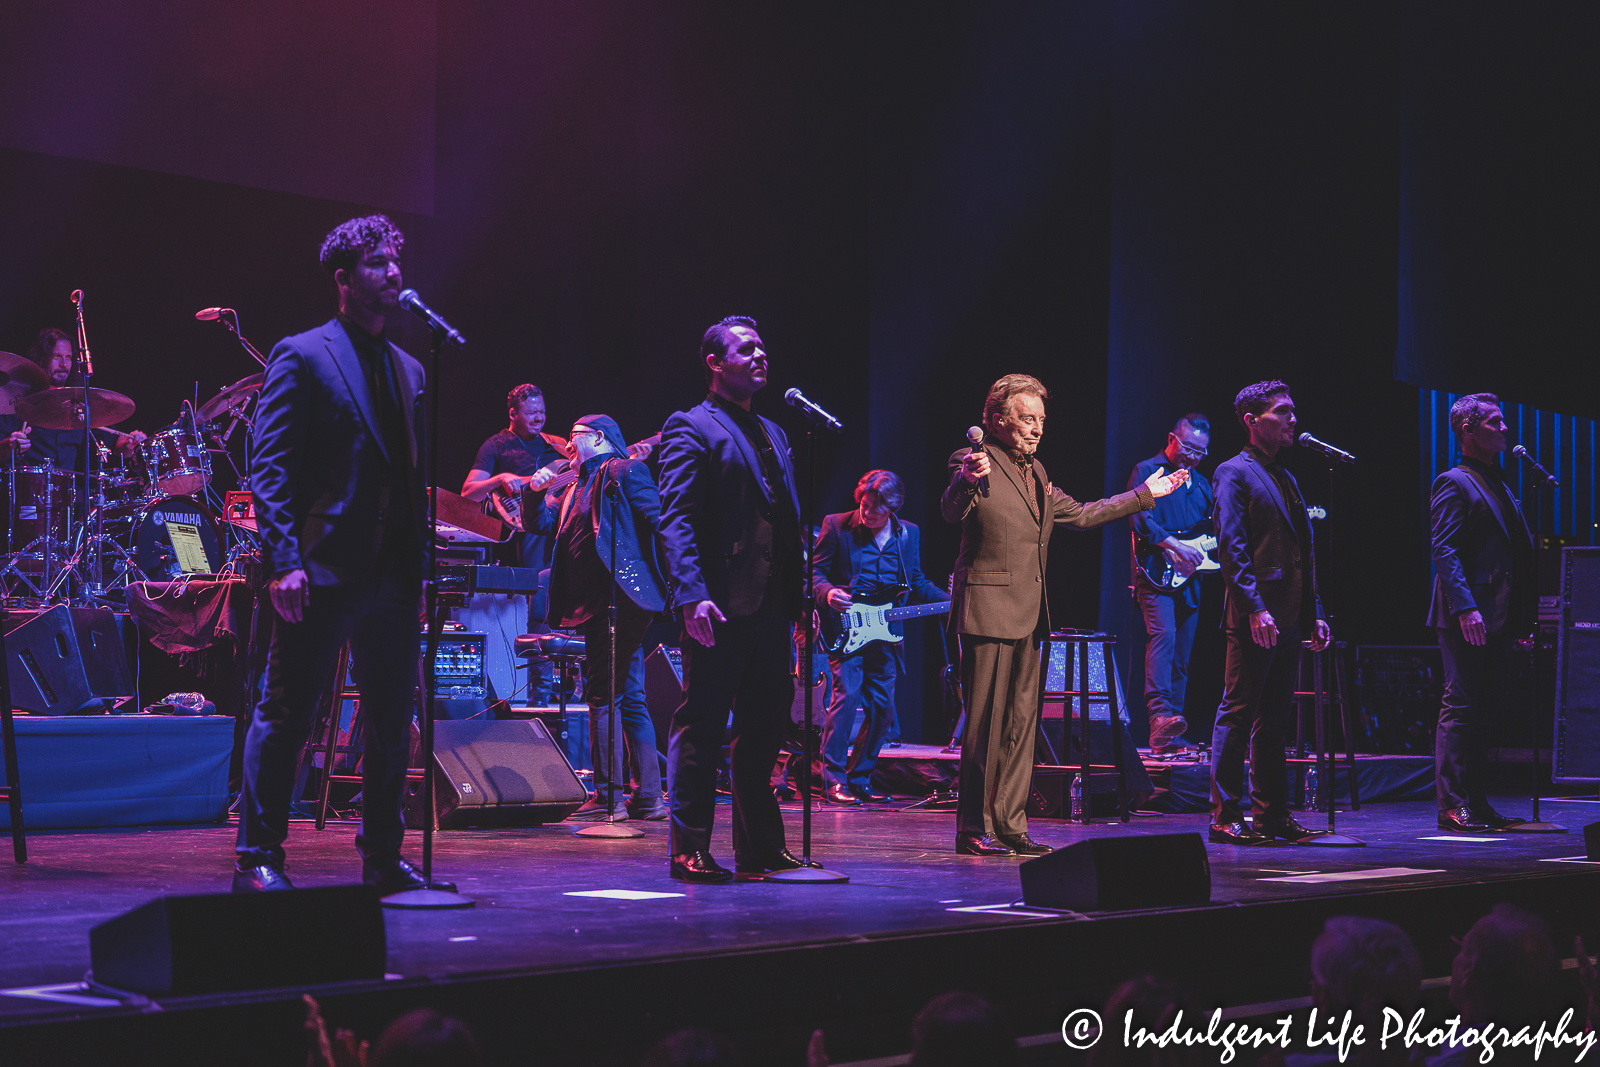 Live concert at Muriel Kauffman Theatre in downtown Kansas City, MO featuring Frankie Valli and the Four Seasons on June 4, 2022.